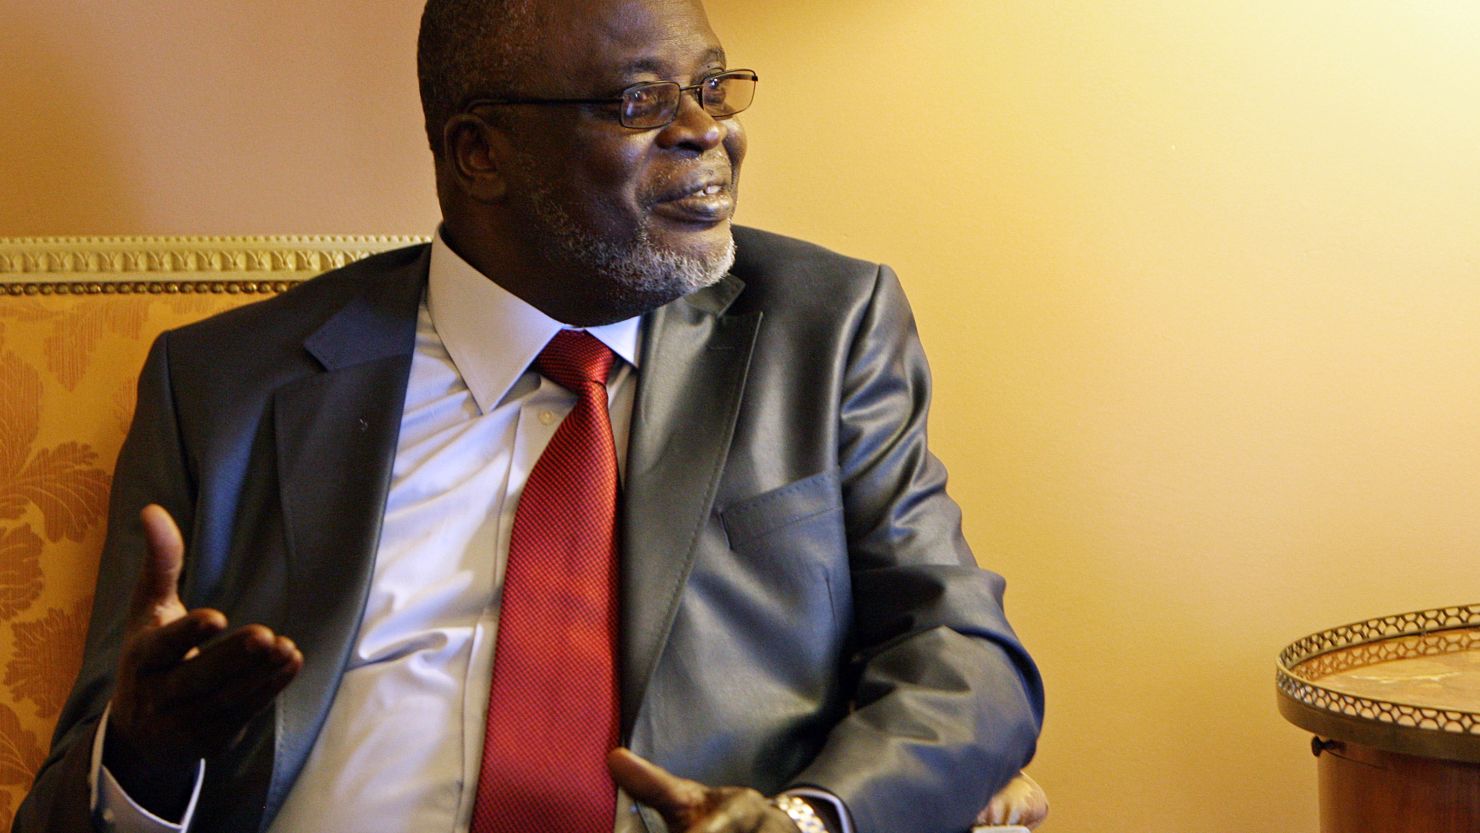 Guinea Bissau's President Malam Bacai Sanha pictured in Lisbon on February 17, 2010.